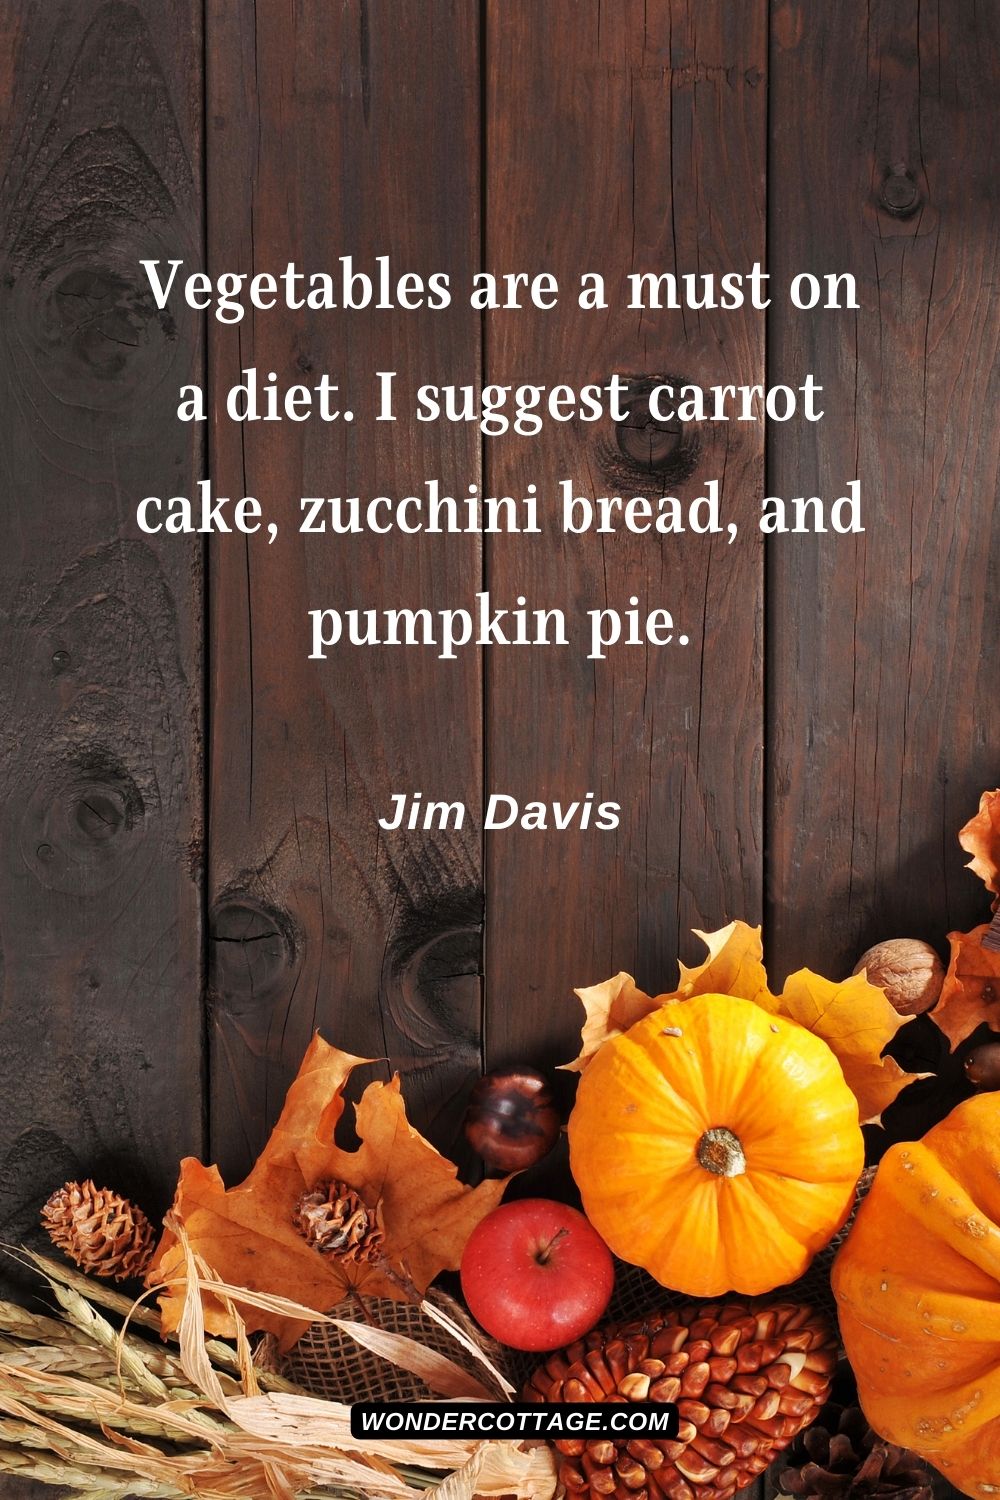 Vegetables are a must on a diet. I suggest carrot cake, zucchini bread, and pumpkin pie. Jim Davis